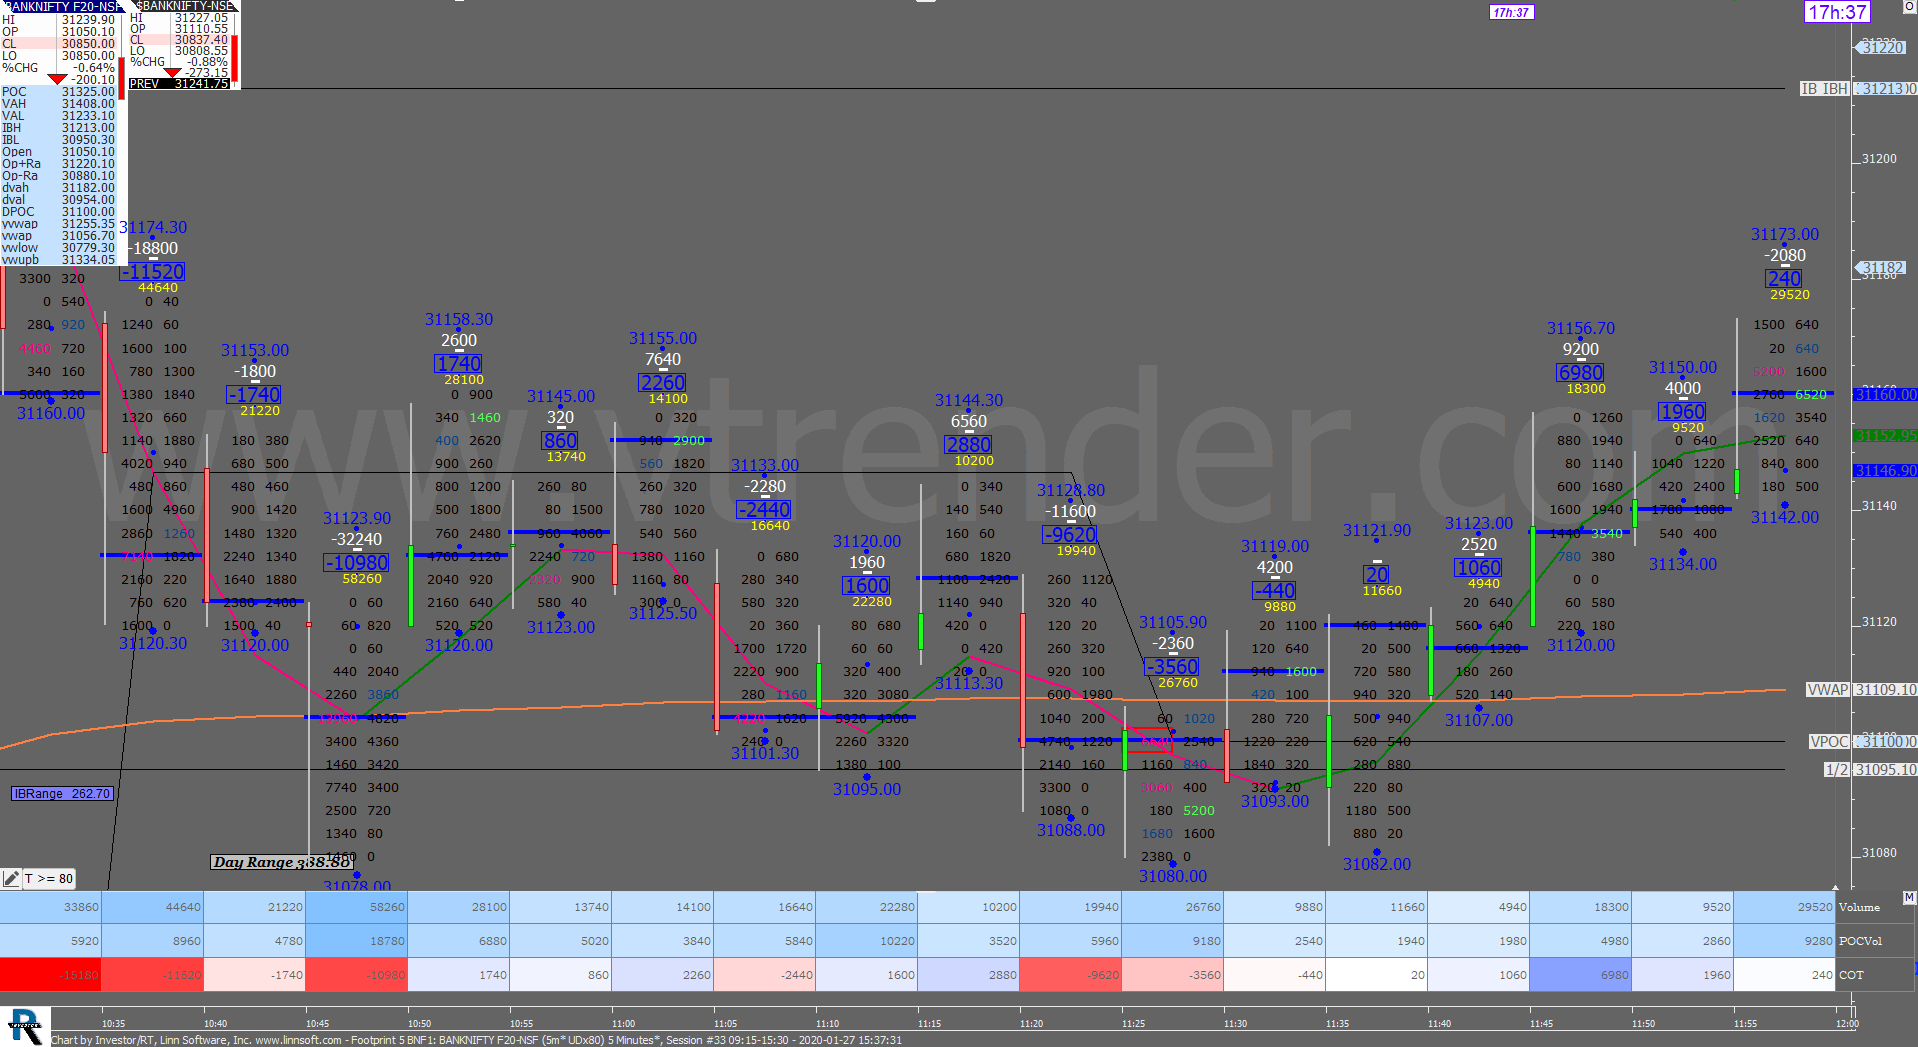 2 33 Order Flow Charts Dated 27Th Jan 2020 (5 Mins) Banknifty Futures, Day Trading, Intraday Trading, Intraday Trading Strategies, Nifty Futures, Order Flow Analysis, Support And Resistance, Trading Strategies, Volume Profile Trading